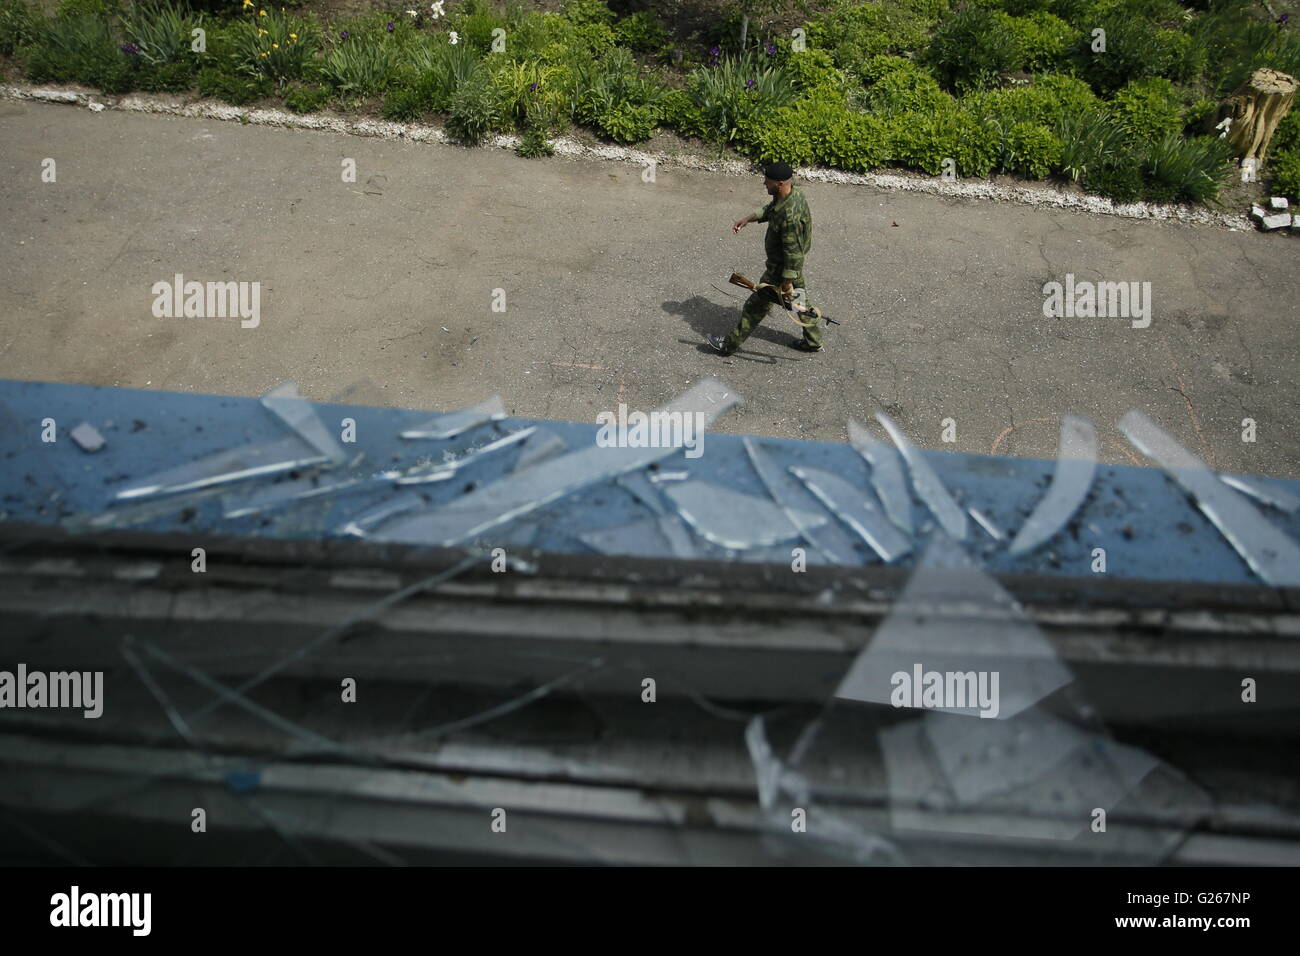 Donetsk, Ukraine. 24th May, 2016. An armed man walks past a damaged window in rebels controlled Staromykhaylivka village near Donetsk, Ukraine, May 24, 2016. Kremlin spokesman Dmitry Peskov confirmed that the Special Monitoring Mission to Ukraine under the Organization for Security and Co-operation in Europe is being discussed. Credit:  Alexander Ermochenko/Xinhua/Alamy Live News Stock Photo